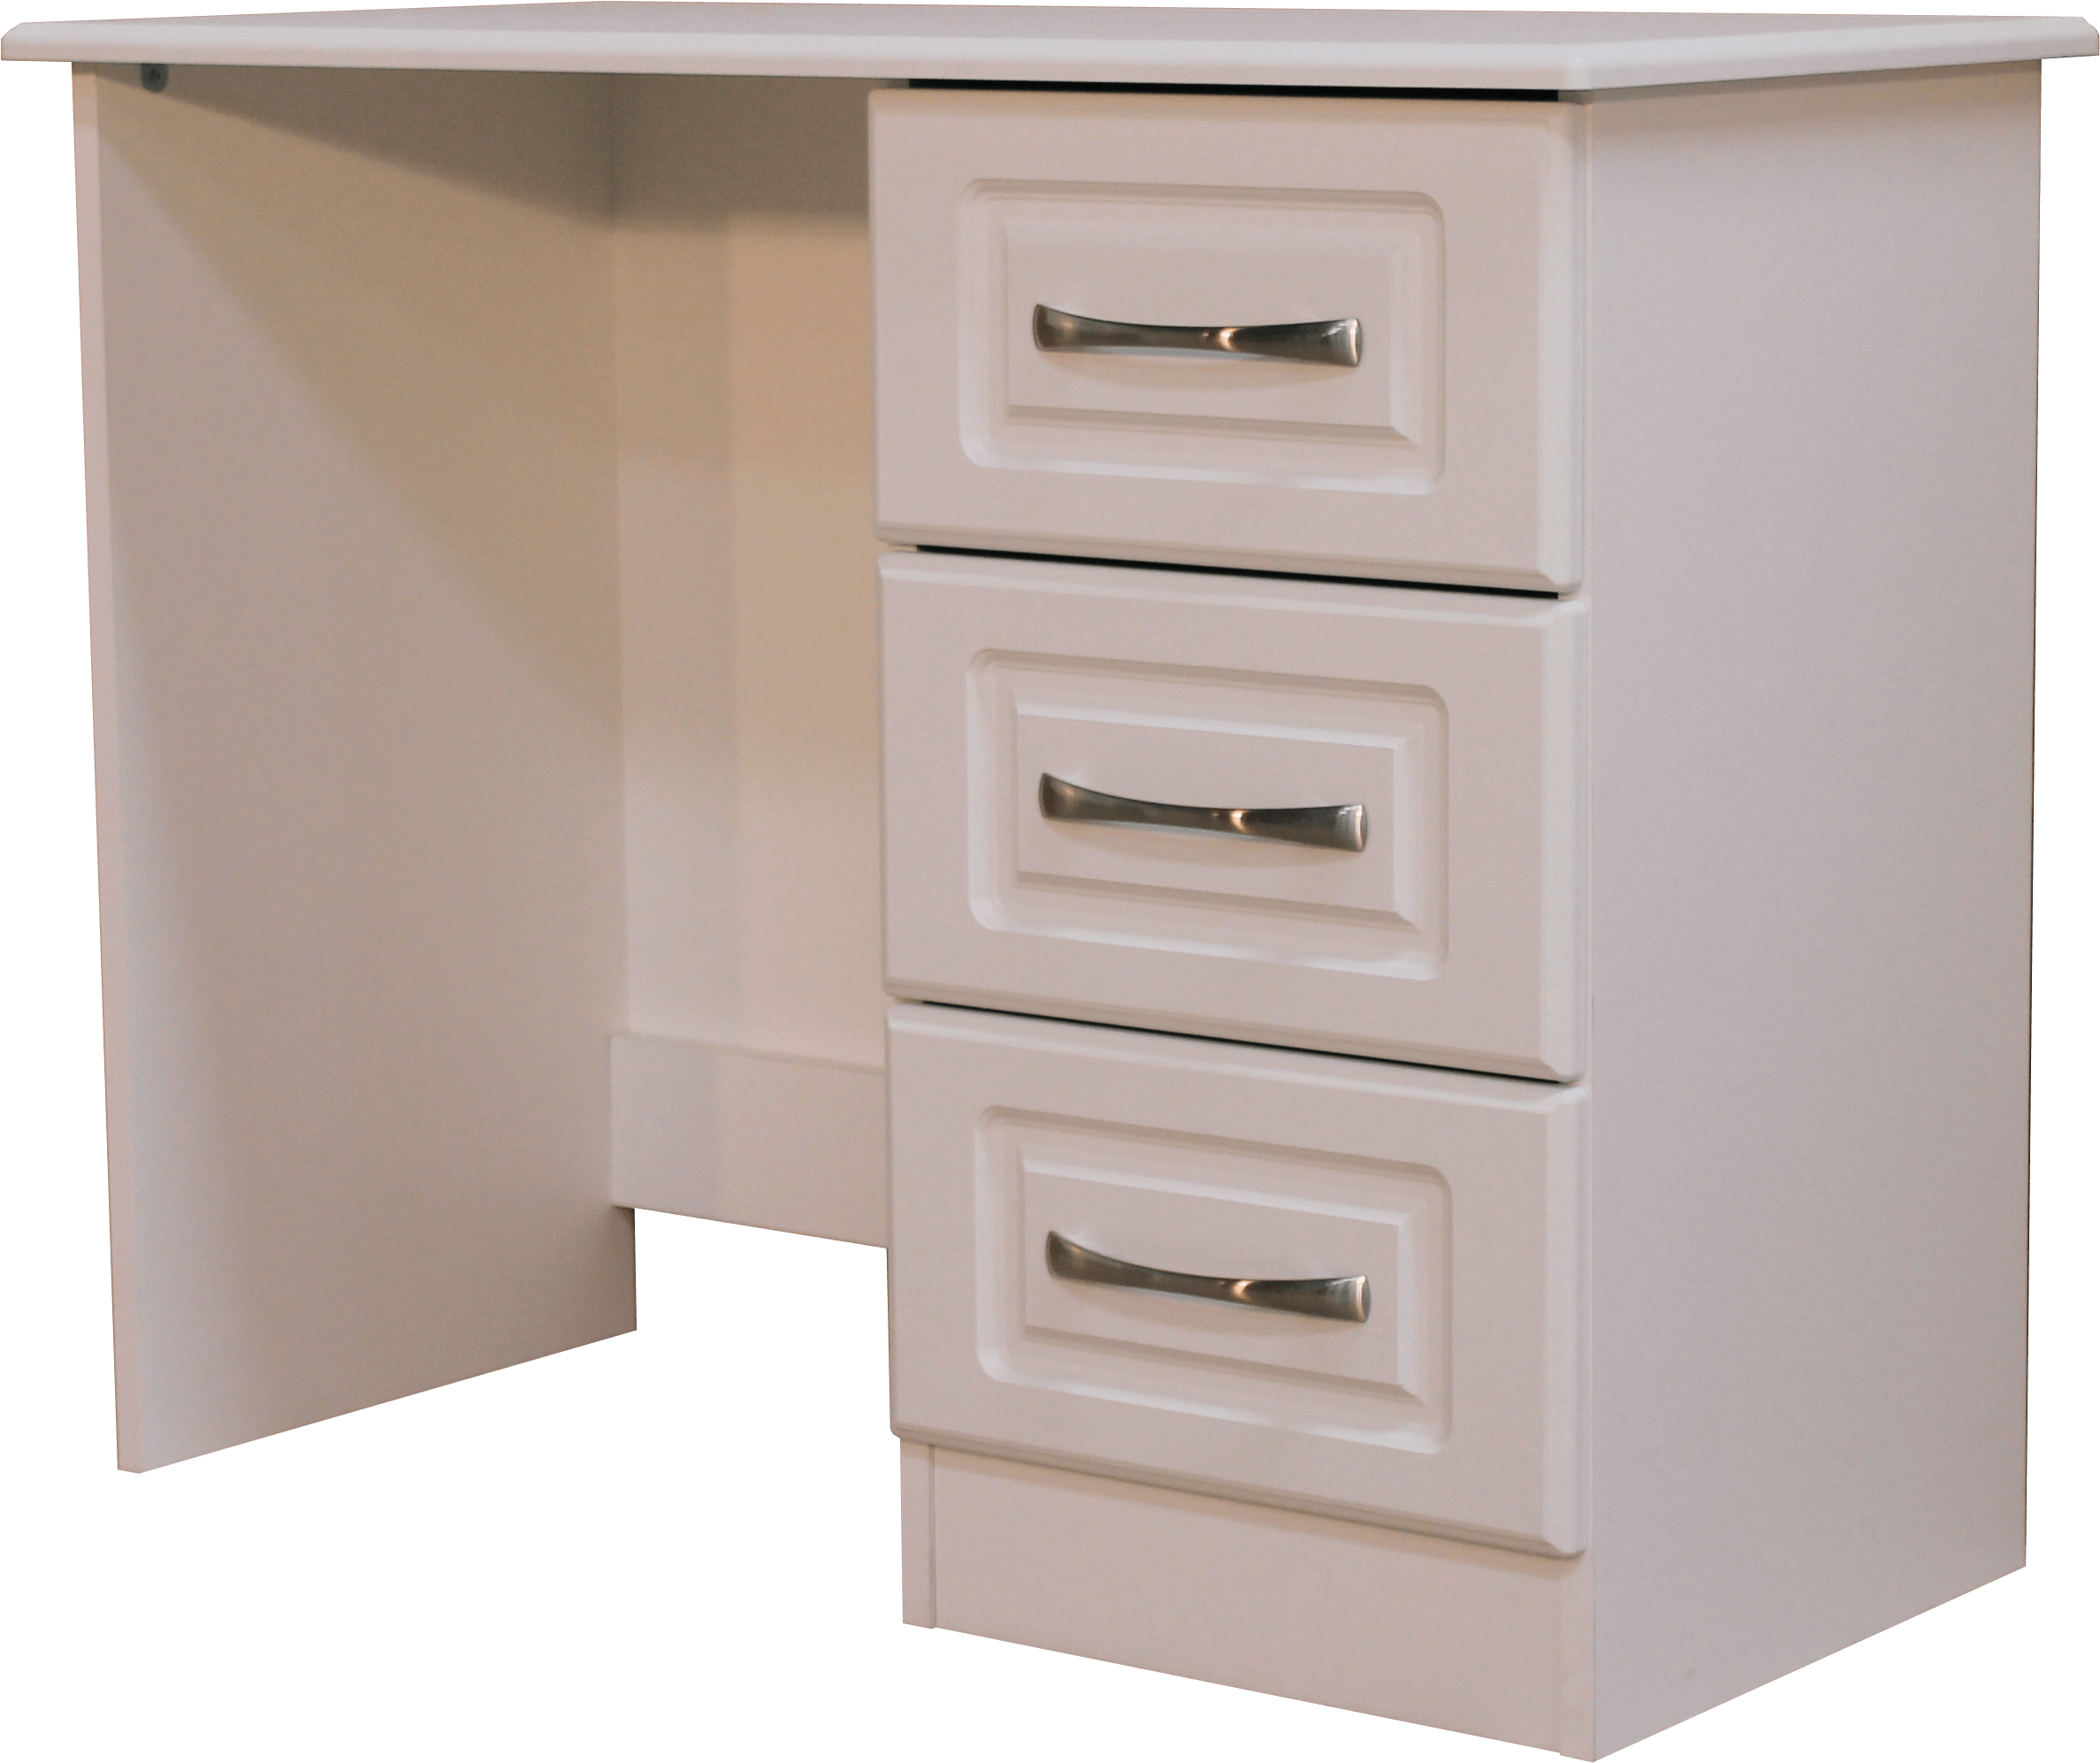 A White Desk With Drawers